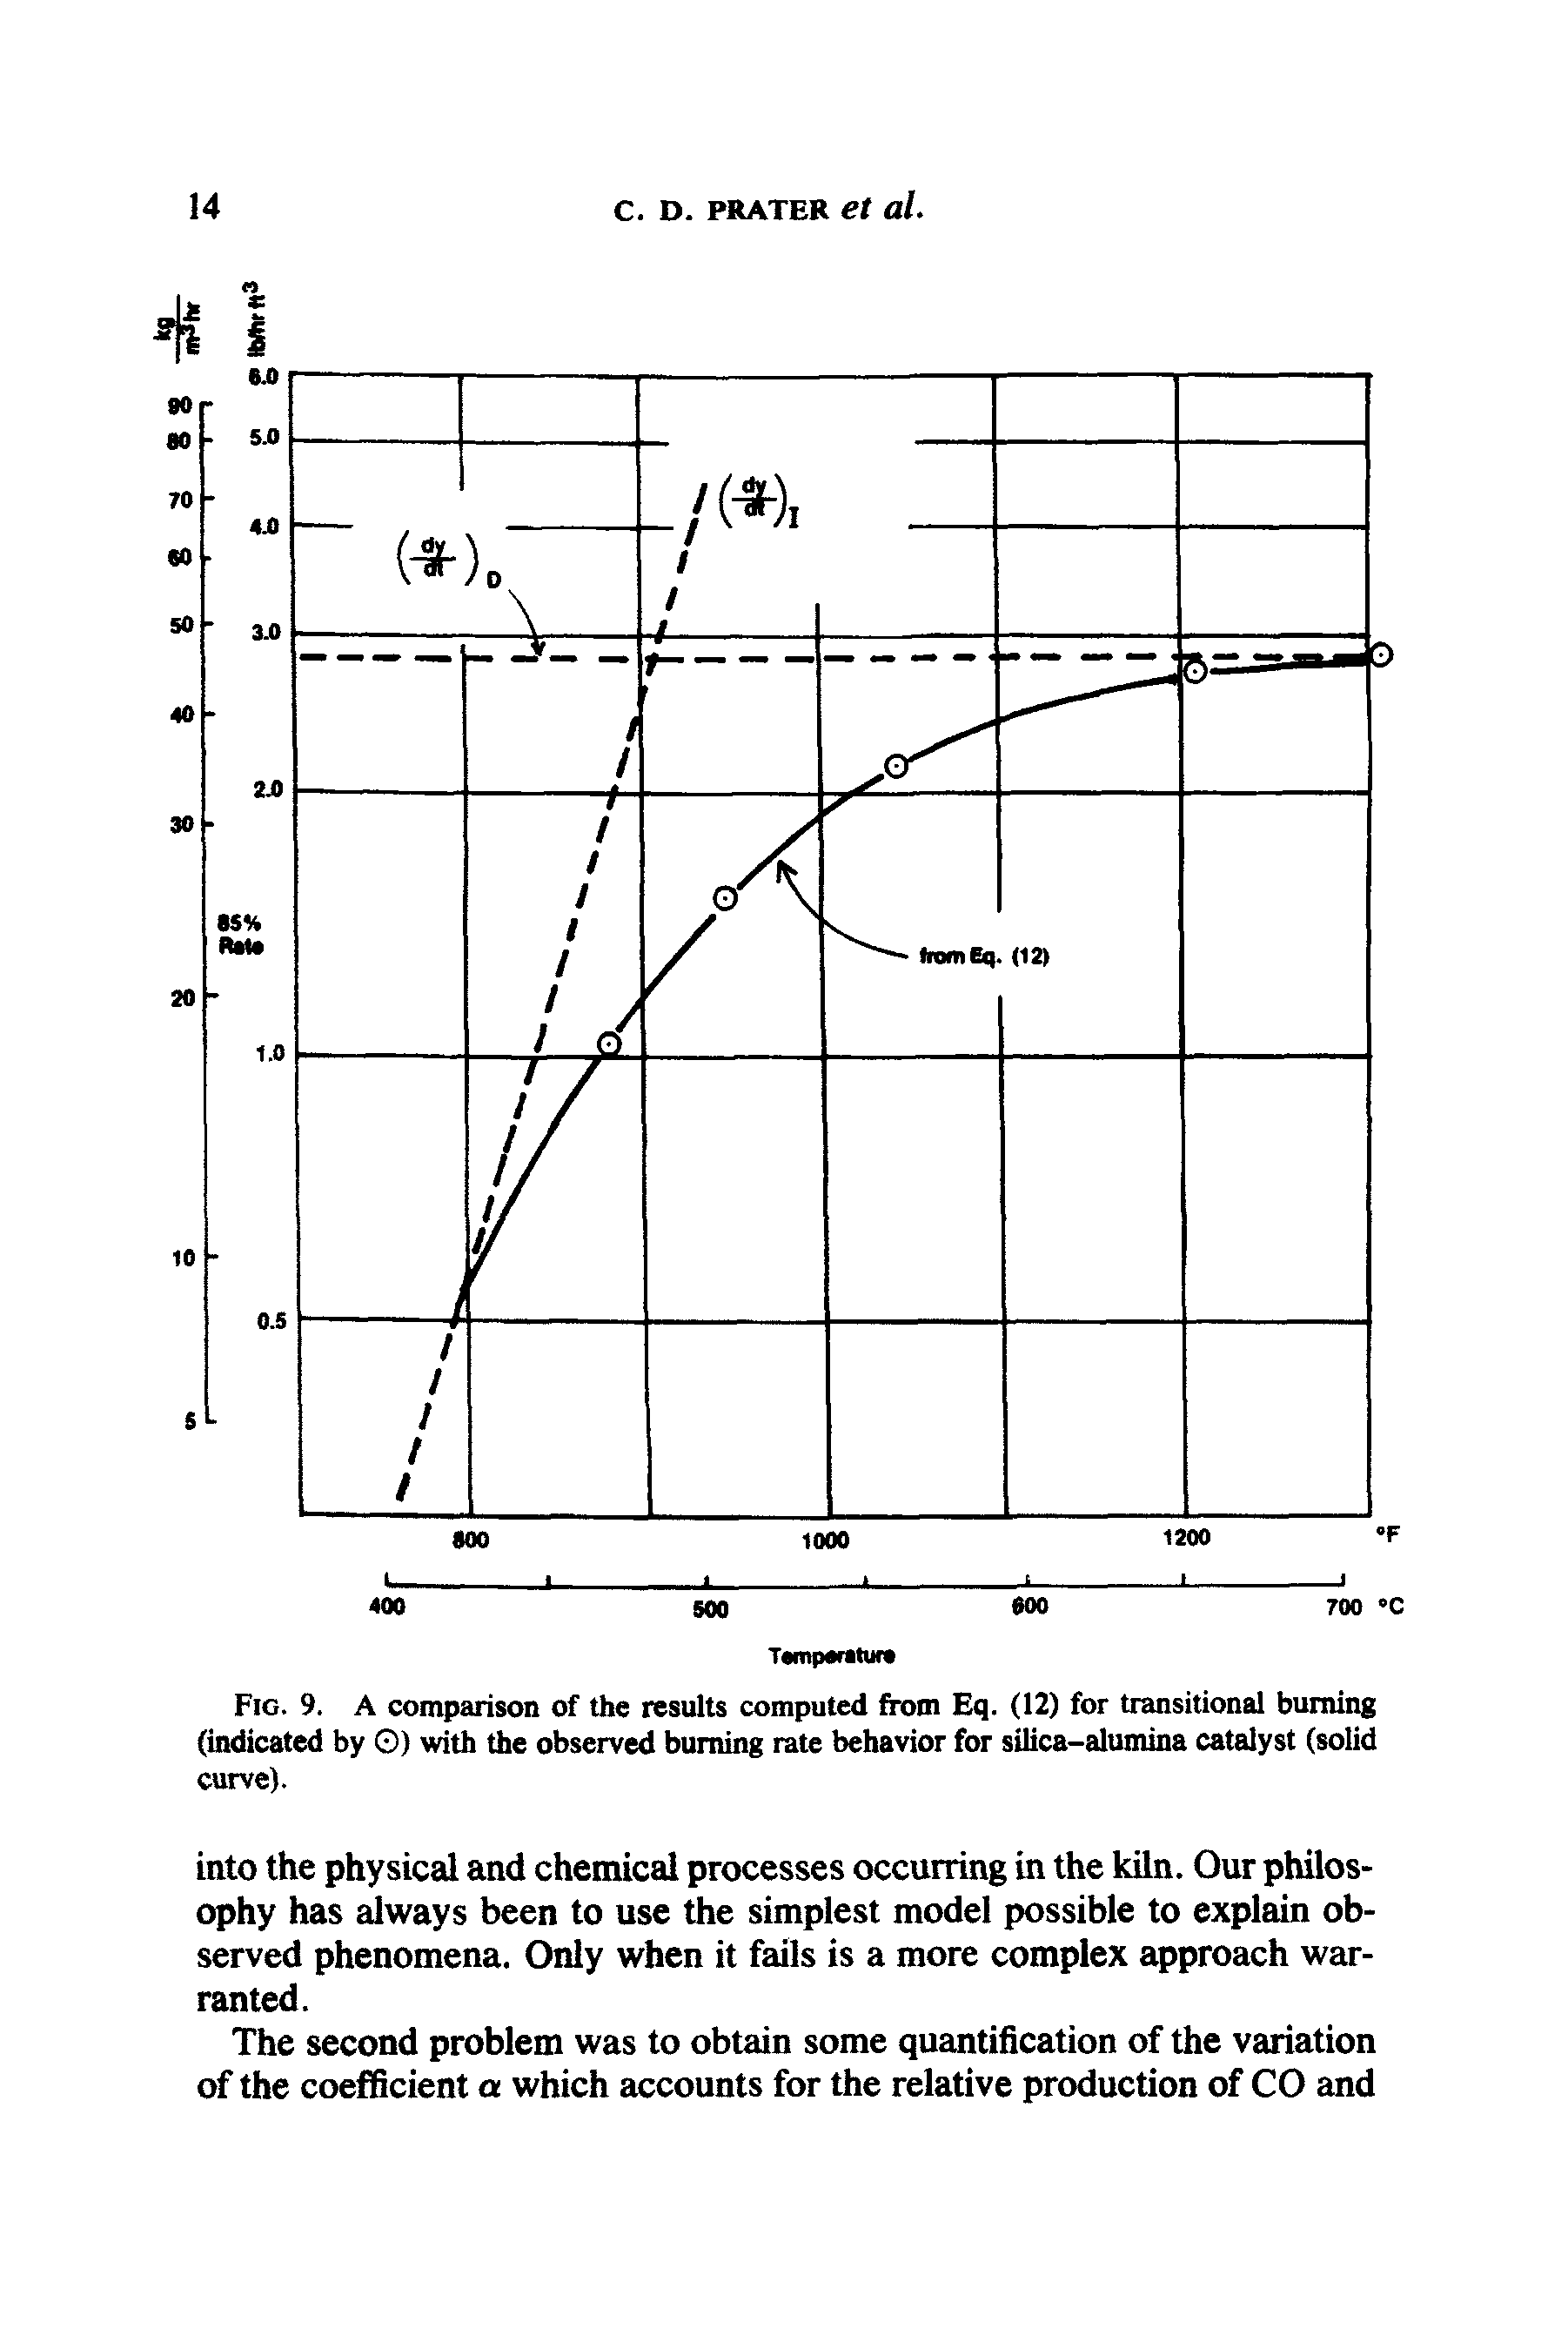 Fig. 9. A comparison of the results computed from Eq. (12) for transitional burning (indicated by O) with the observed burning rate behavior for silica-alumina catalyst (solid curve).